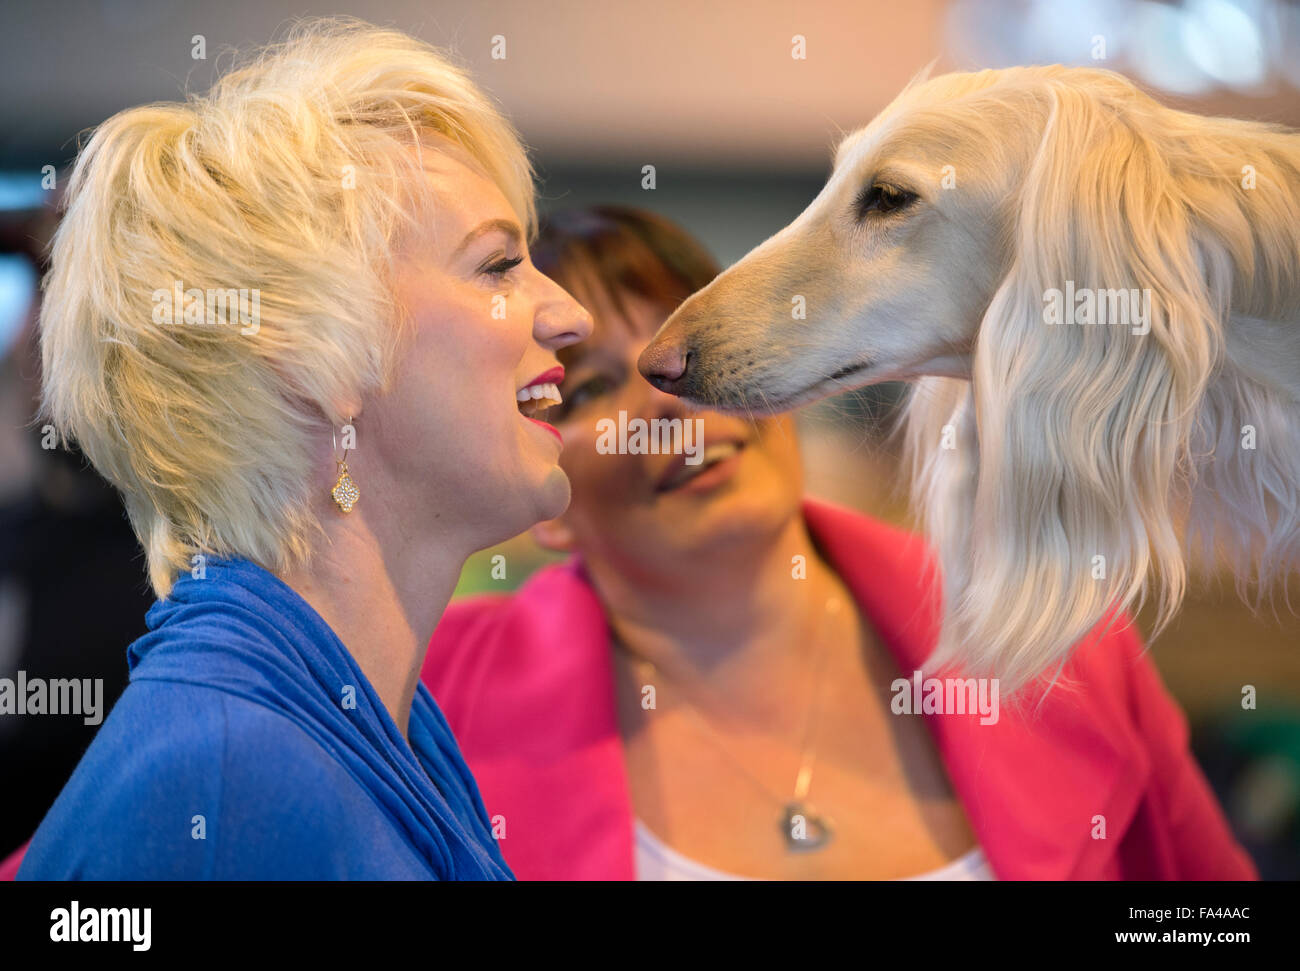 Crufts dog show at the NEC, Birmingham - A dog lover meets an Afghan Hound with the pet name ‘Marcus’ before showing Stock Photo